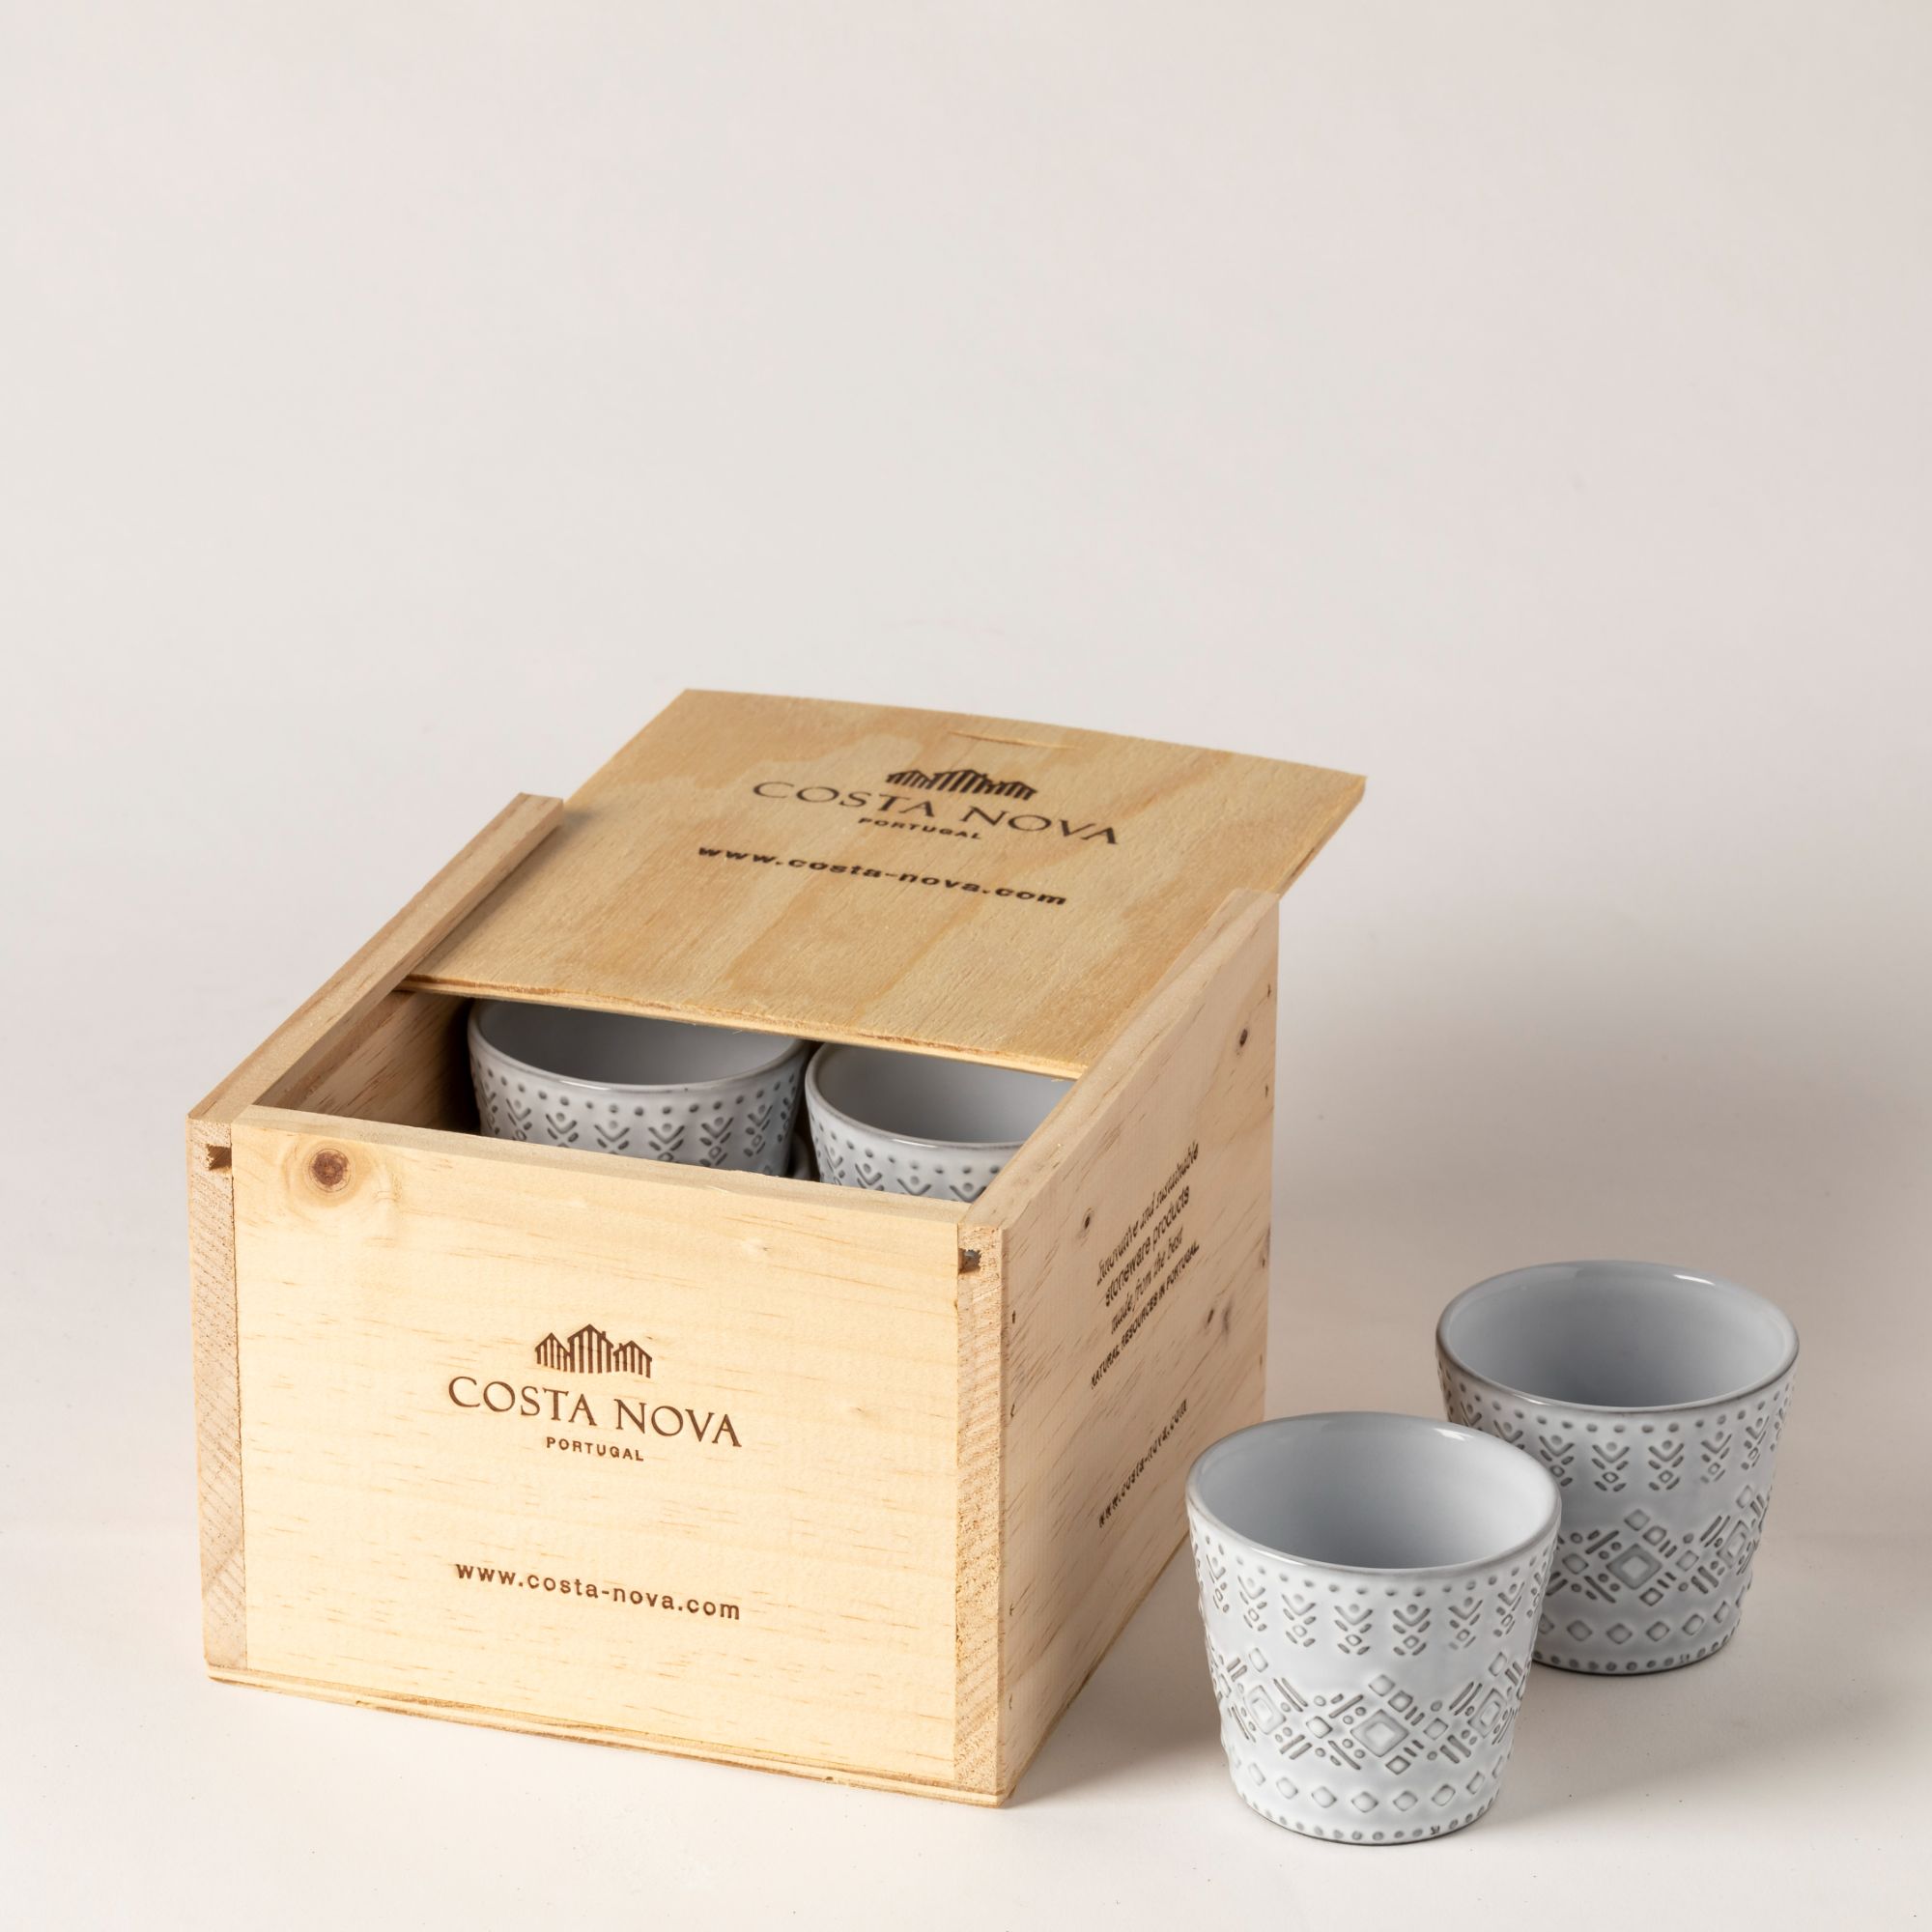 Grespresso Eco Wht Colombia Gft Bx 8 Esprsso Cups Gift